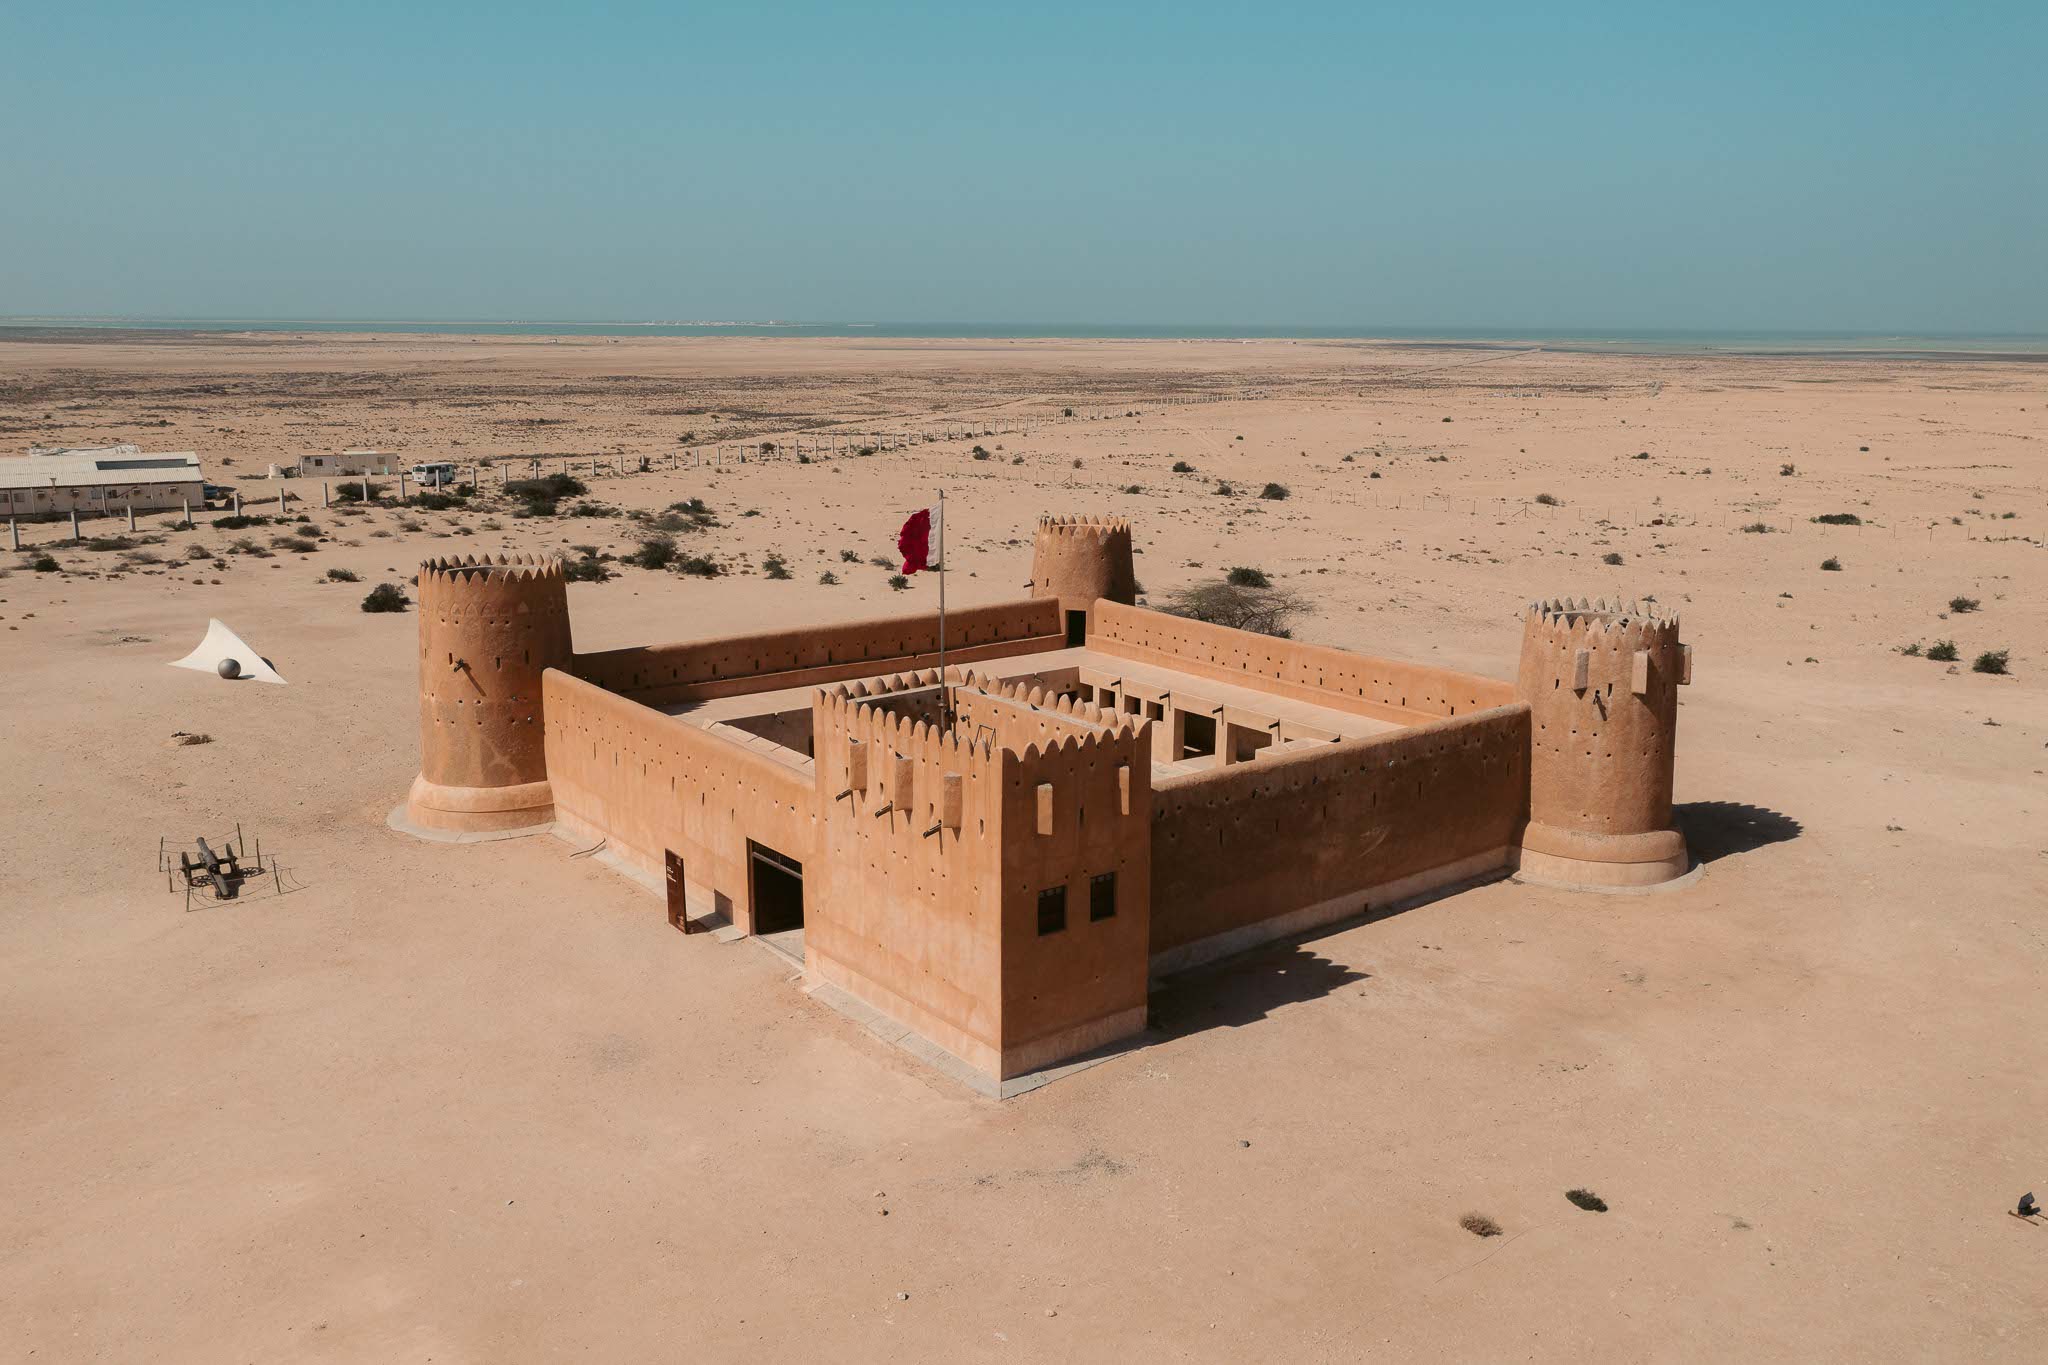 A square fortress (Al Zubarah) surrounded by bare sandy earth. Round towers stand at three of the fortress's corners. The fourth corner, next to the fortress's entrance, is dominated by a rectangular tower, from which the Qatari flag flies. Outside the walls of the fortress sits a small cannon, surrounded by ropes. A wire fence stretches behind the fortress. On the other side of the fence is a low modern building and a bus. A sliver of sea is visible on the horizon. It's day time.